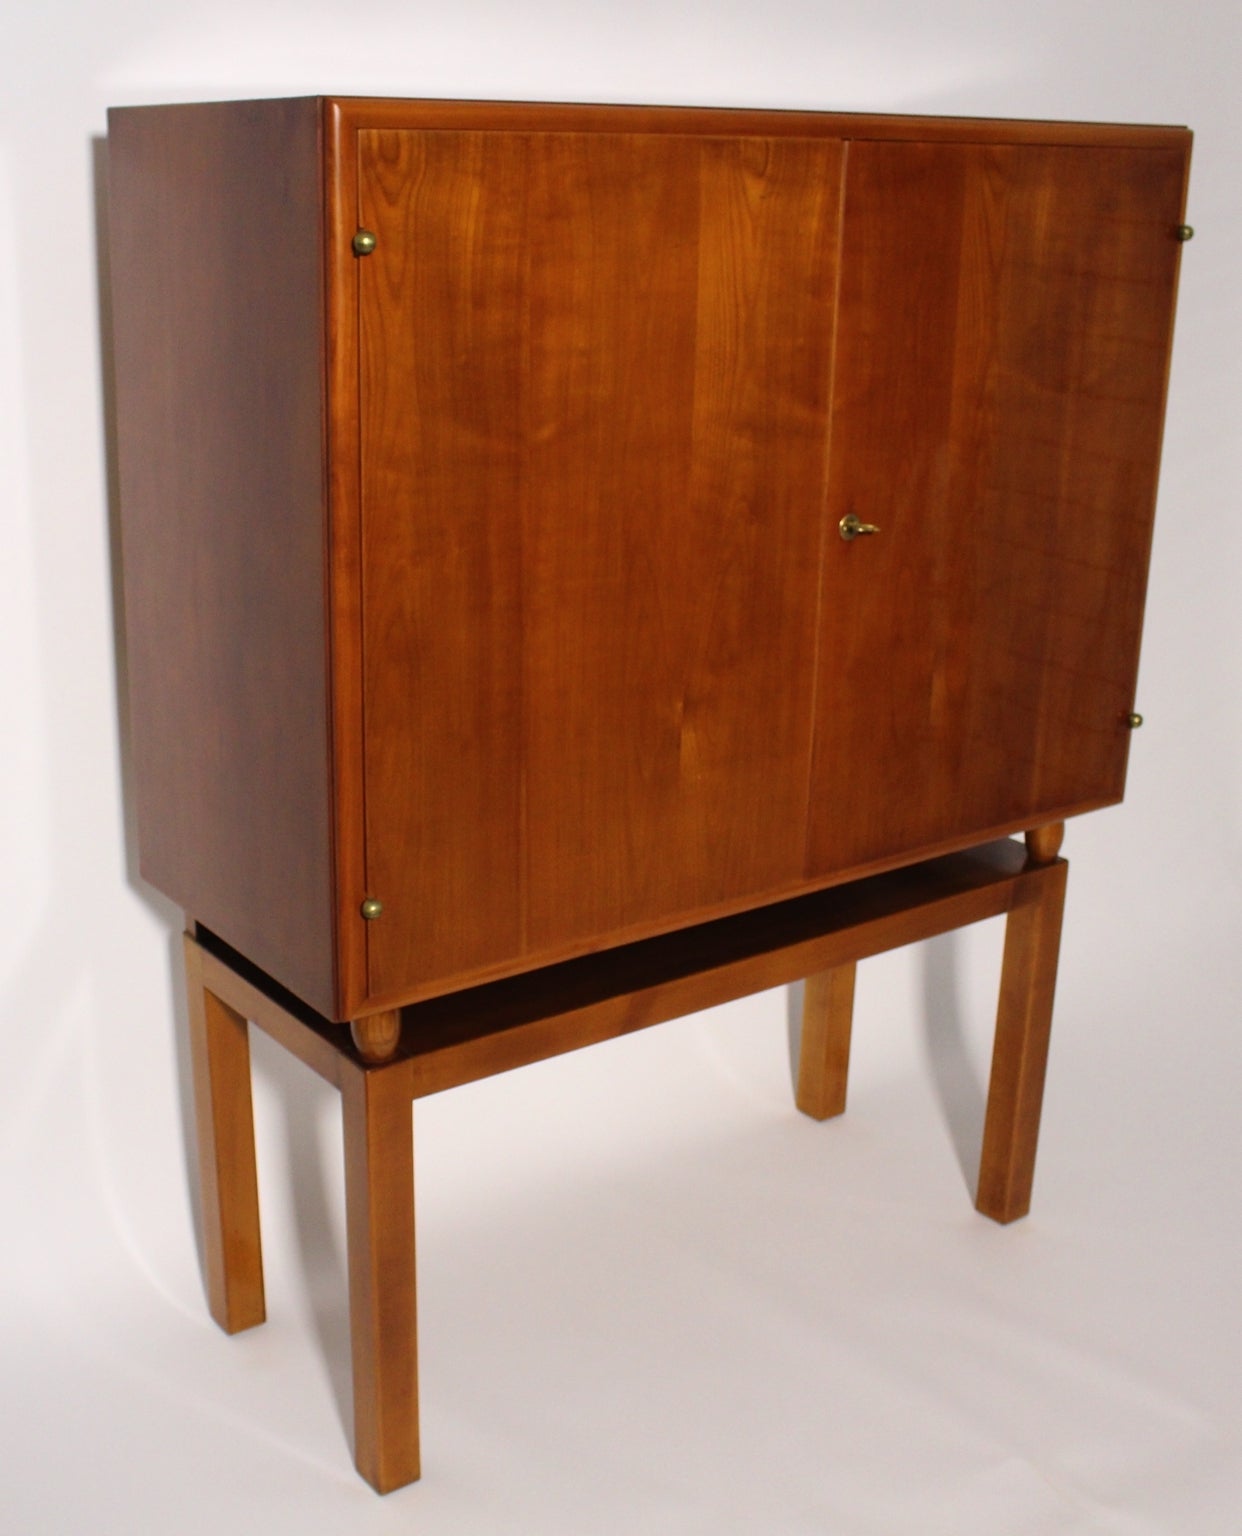 Josef Frank Art Deco cherrywood cabinet or Bergemöbel for Haus Und Garten, Vienna, circa 1925 
Josef Frank is one of the most popular Austrian representatives from architects and designers of the Art Deco period in Vienna.
His work presented cosy